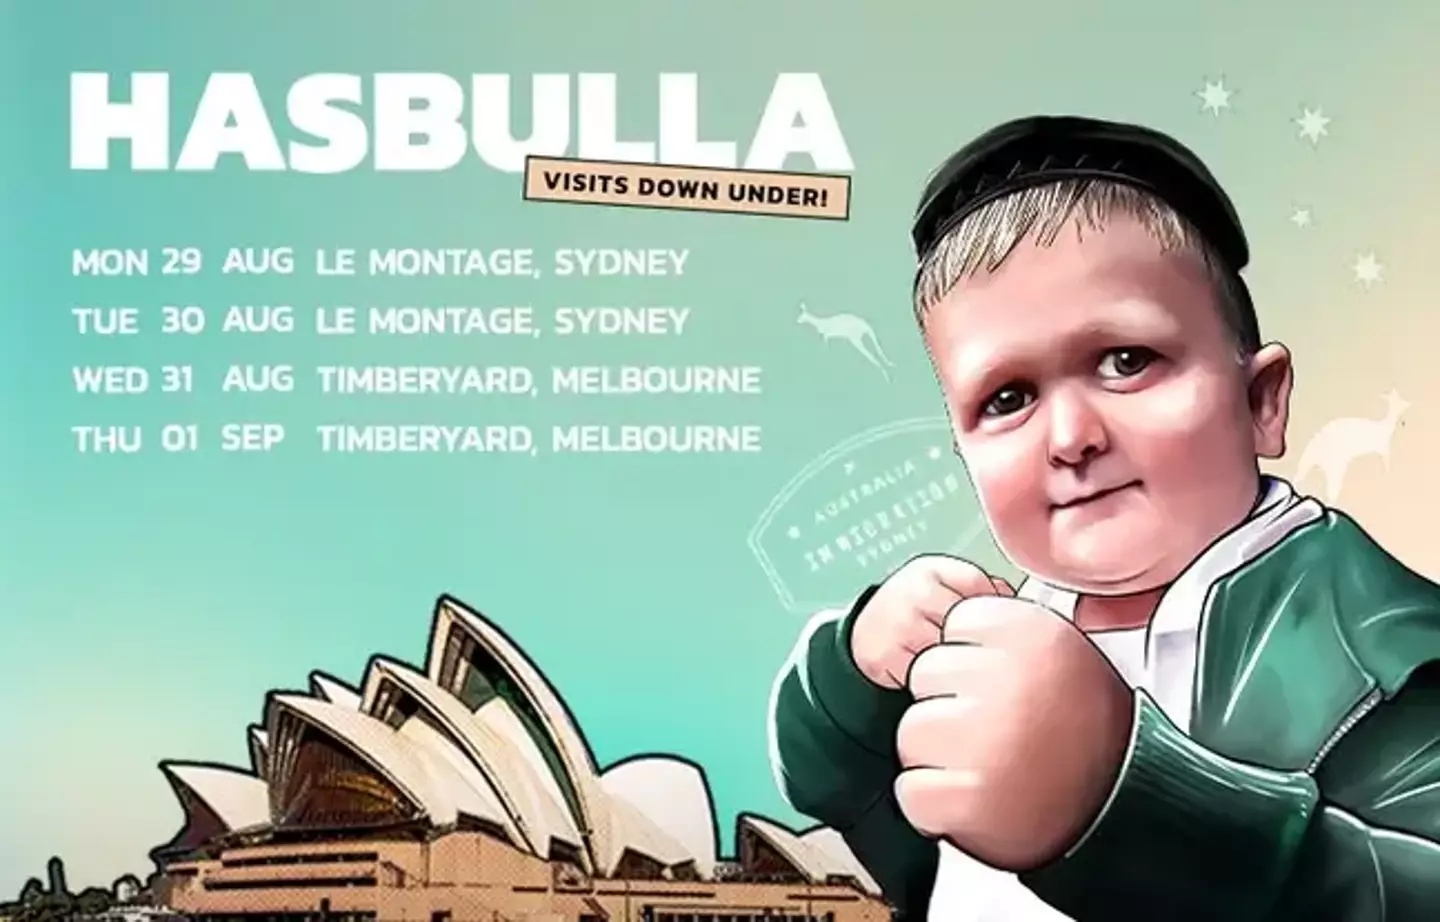 Hasbulla's currently on tour in Australia.